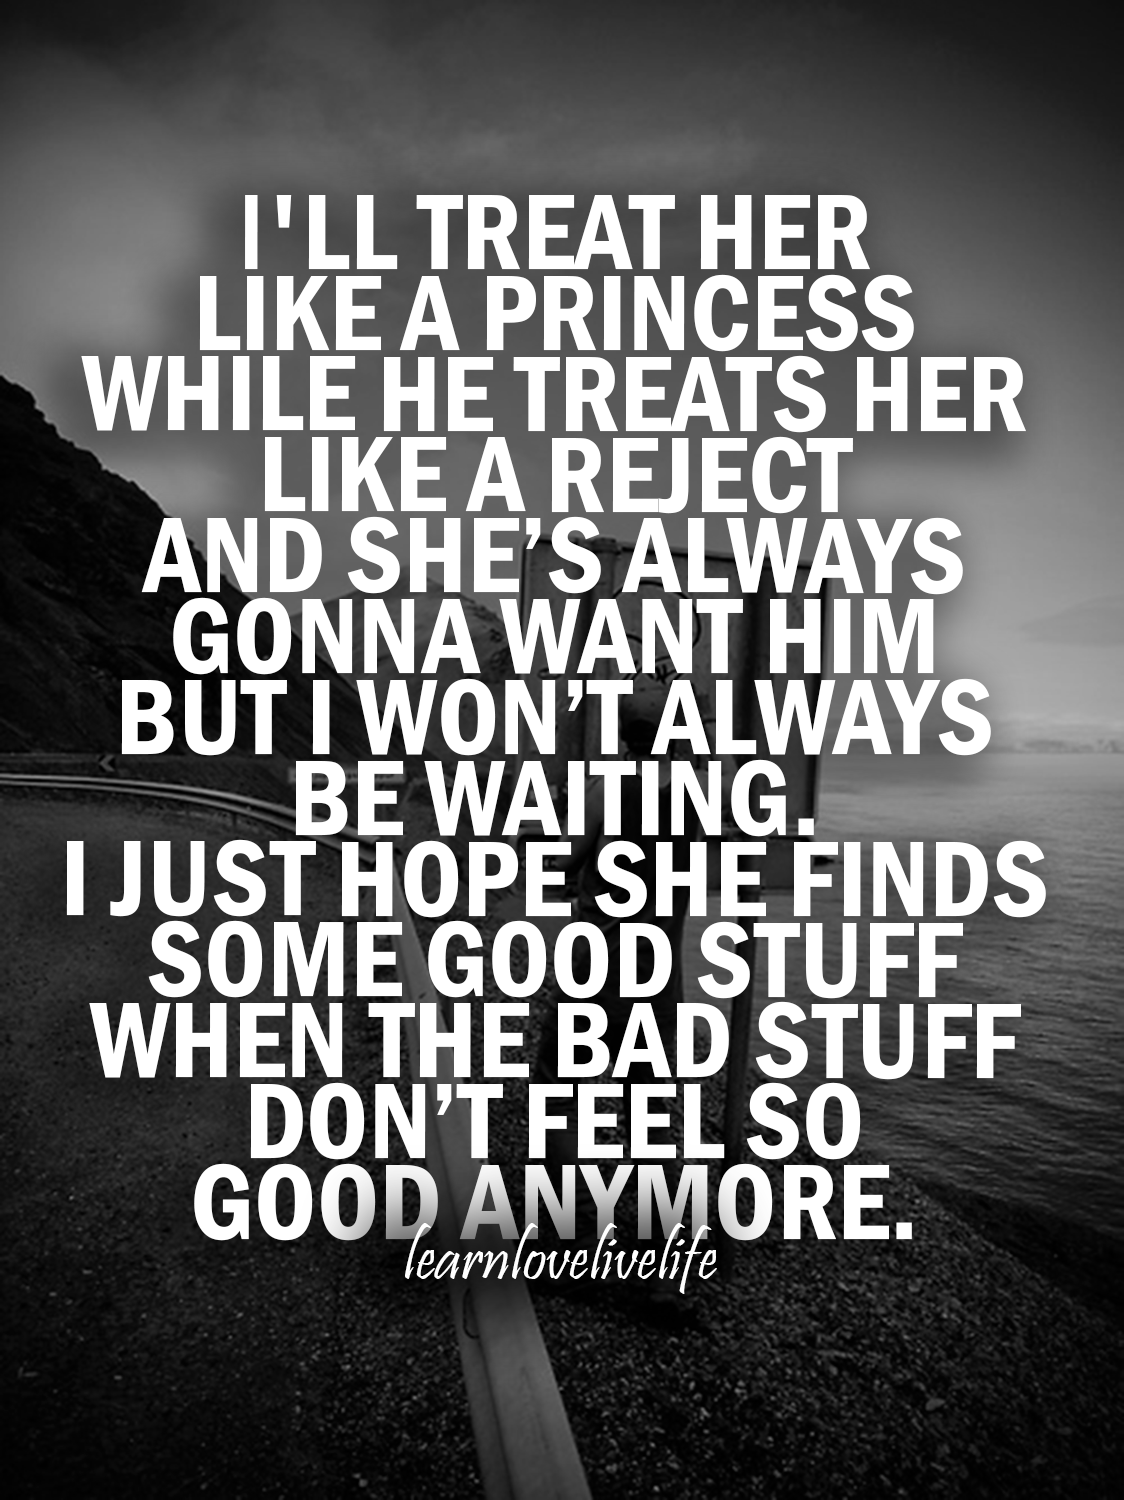 55 Best Break Up Quotes To Make You Feel Better – The WoW Style